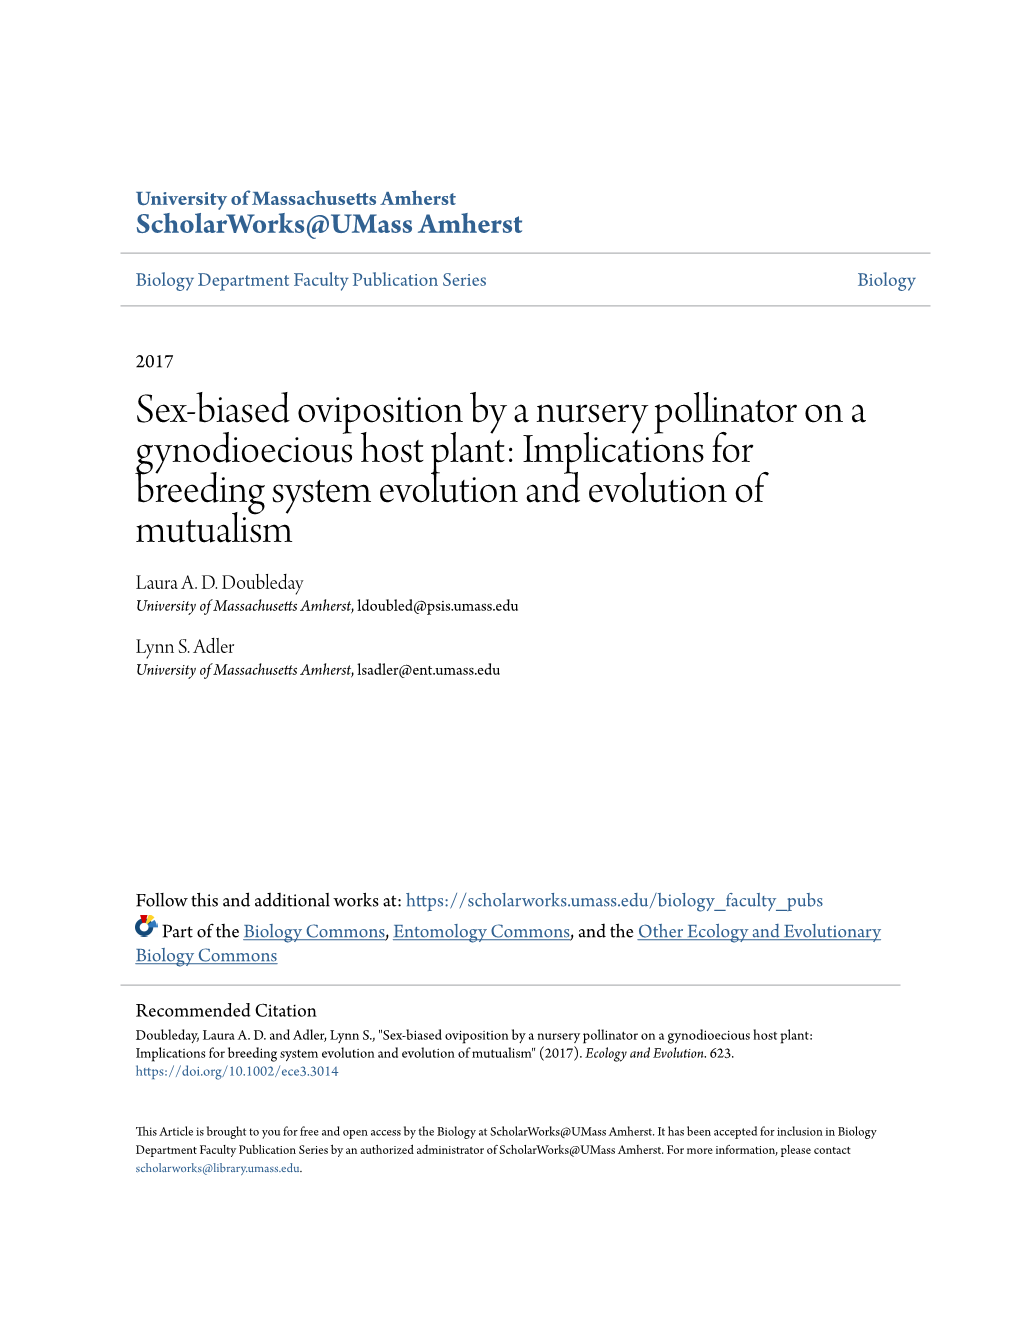 Sex-Biased Oviposition by a Nursery Pollinator on a Gynodioecious Host Plant: Implications for Breeding System Evolution and Evolution of Mutualism Laura A